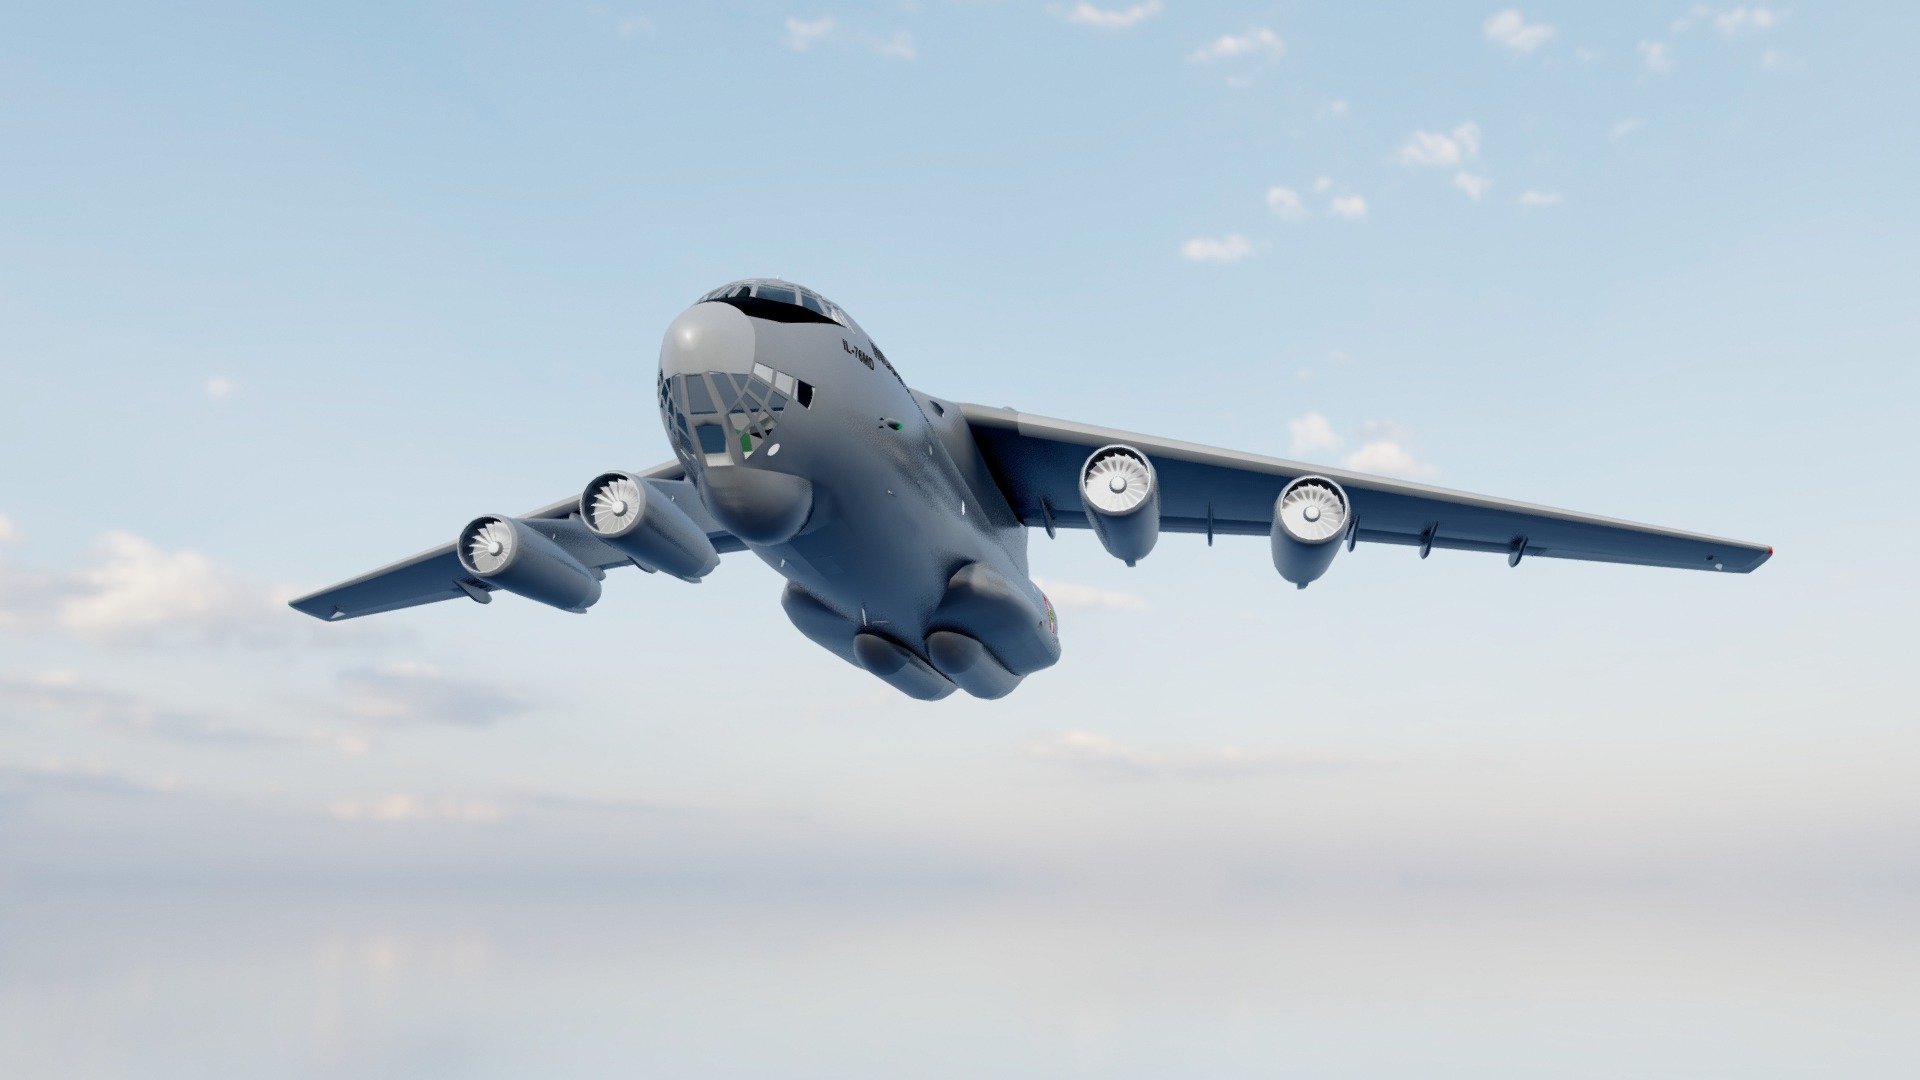 This detailed 3D model represents the iconic IL-76 military transport aircraft, a versatile workhorse of the skies. Designed in the Soviet Union, the IL-76 boasts impressive cargo capabilities and has served various roles including airlifting troops, transporting vehicles, delivering humanitarian aid, and more. This accurately crafted 3D model captures the aircraft's distinctive features, from its four turbofan engines to its large cargo bay doors. Whether you're a history enthusiast, an aviation buff, or working on a project requiring precision, this 3D model of the IL-76 is a valuable asset. Ideal for simulations, visualizations, and educational purposes 3d model